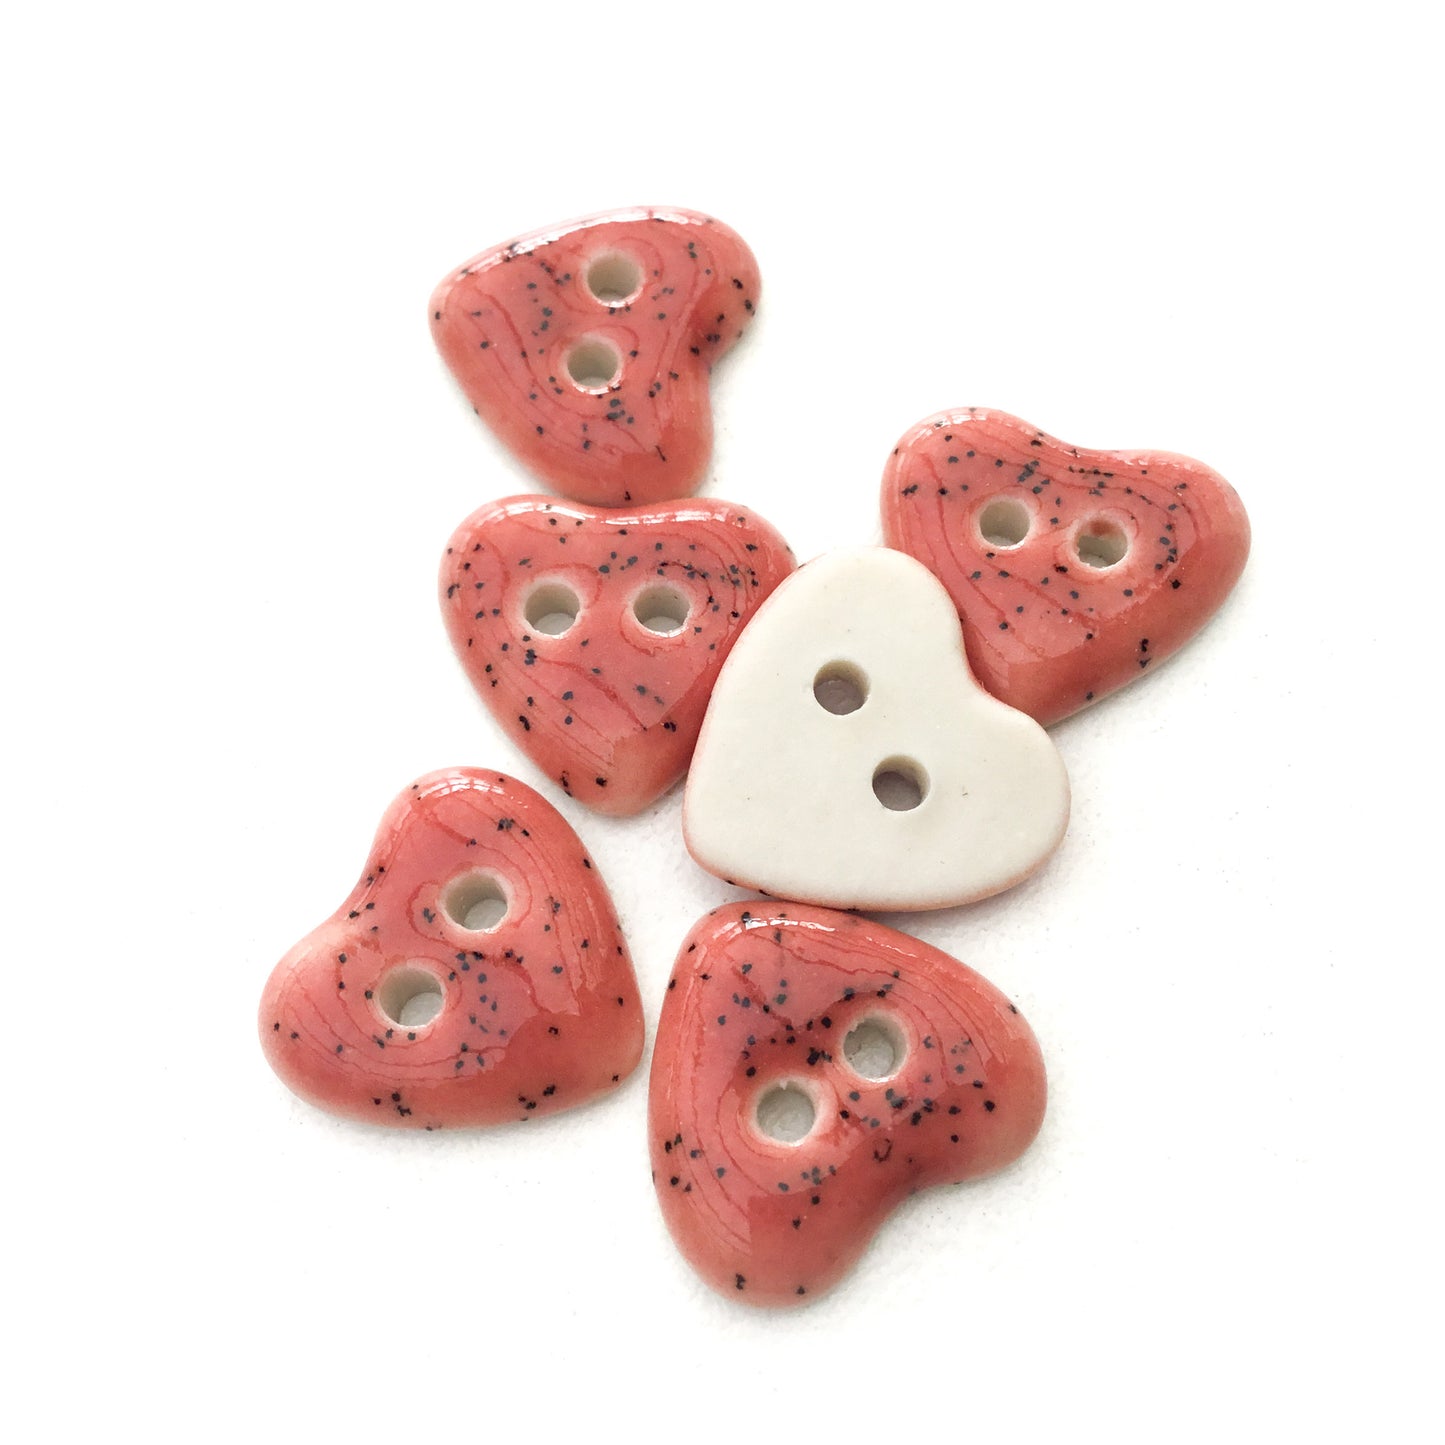 Speckled Dusty Rose Porcelain Heart Buttons  9/16"